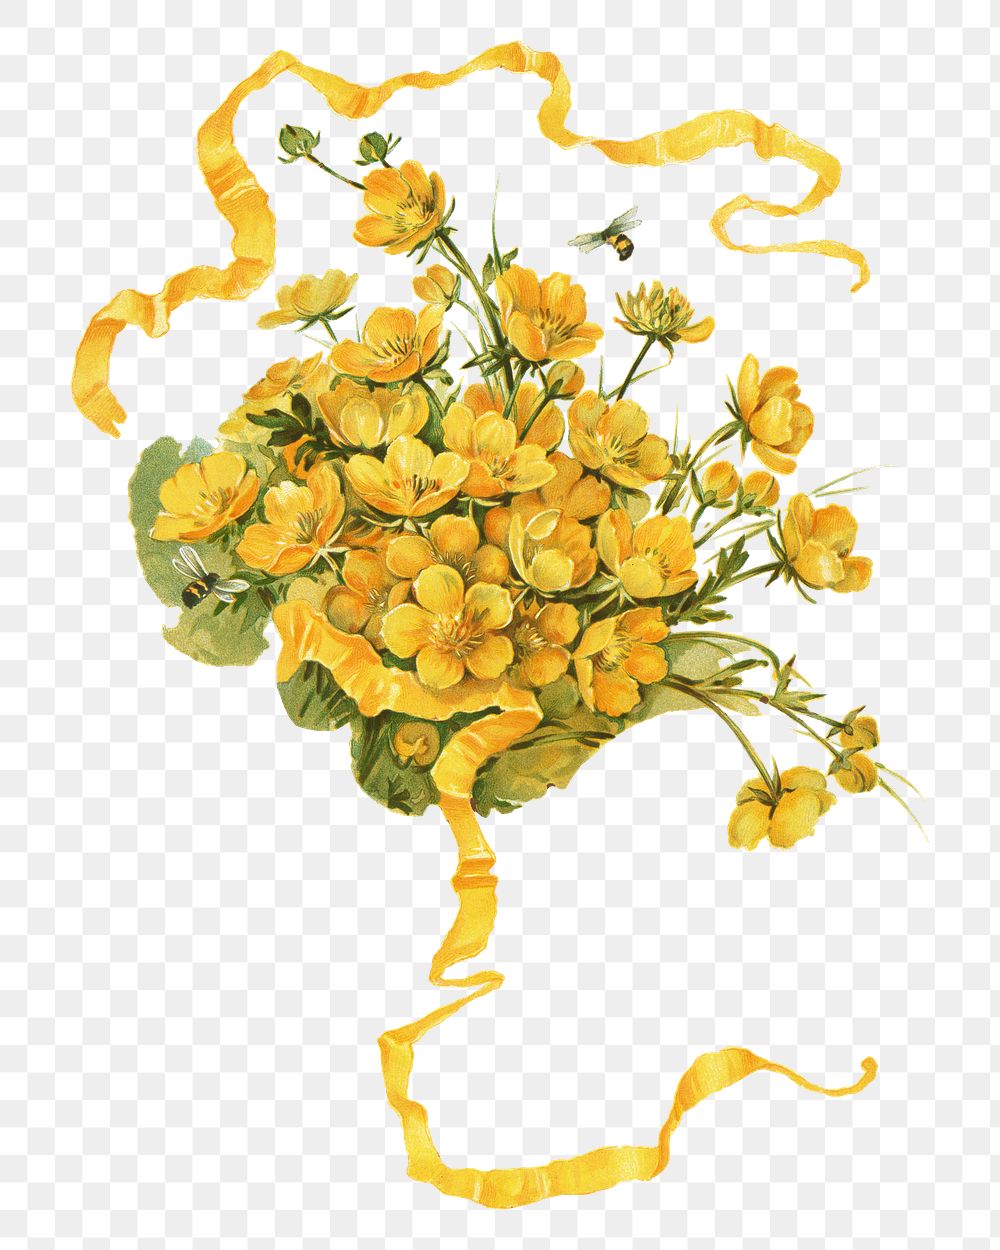 PNG Buttercups, vintage flower illustration by L. Prang & Co., transparent background. Remixed by rawpixel.